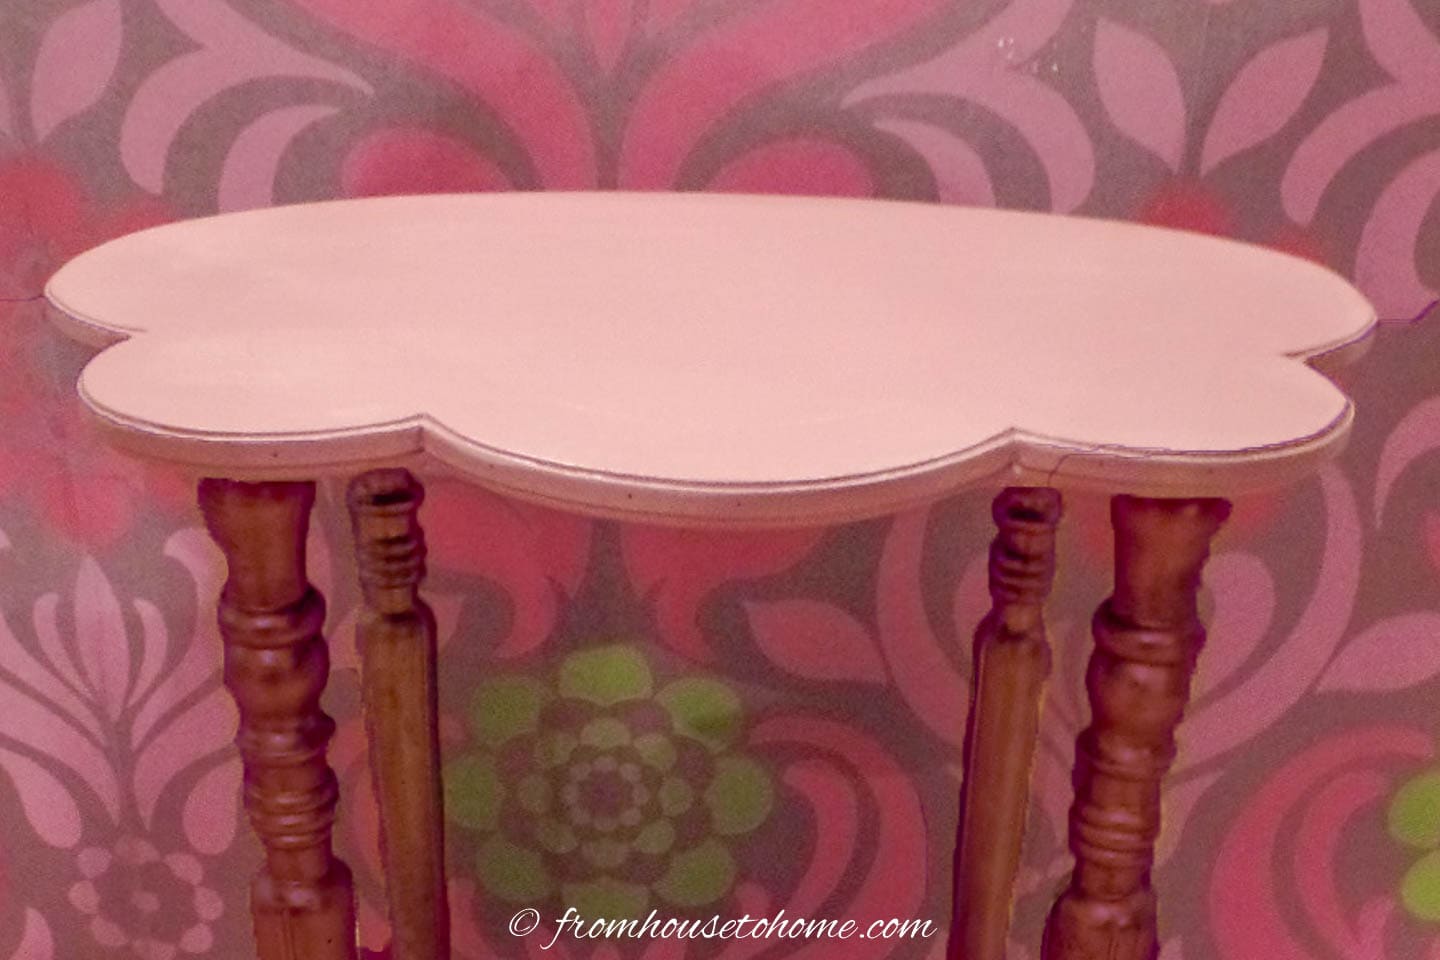 the table with the top painted pink